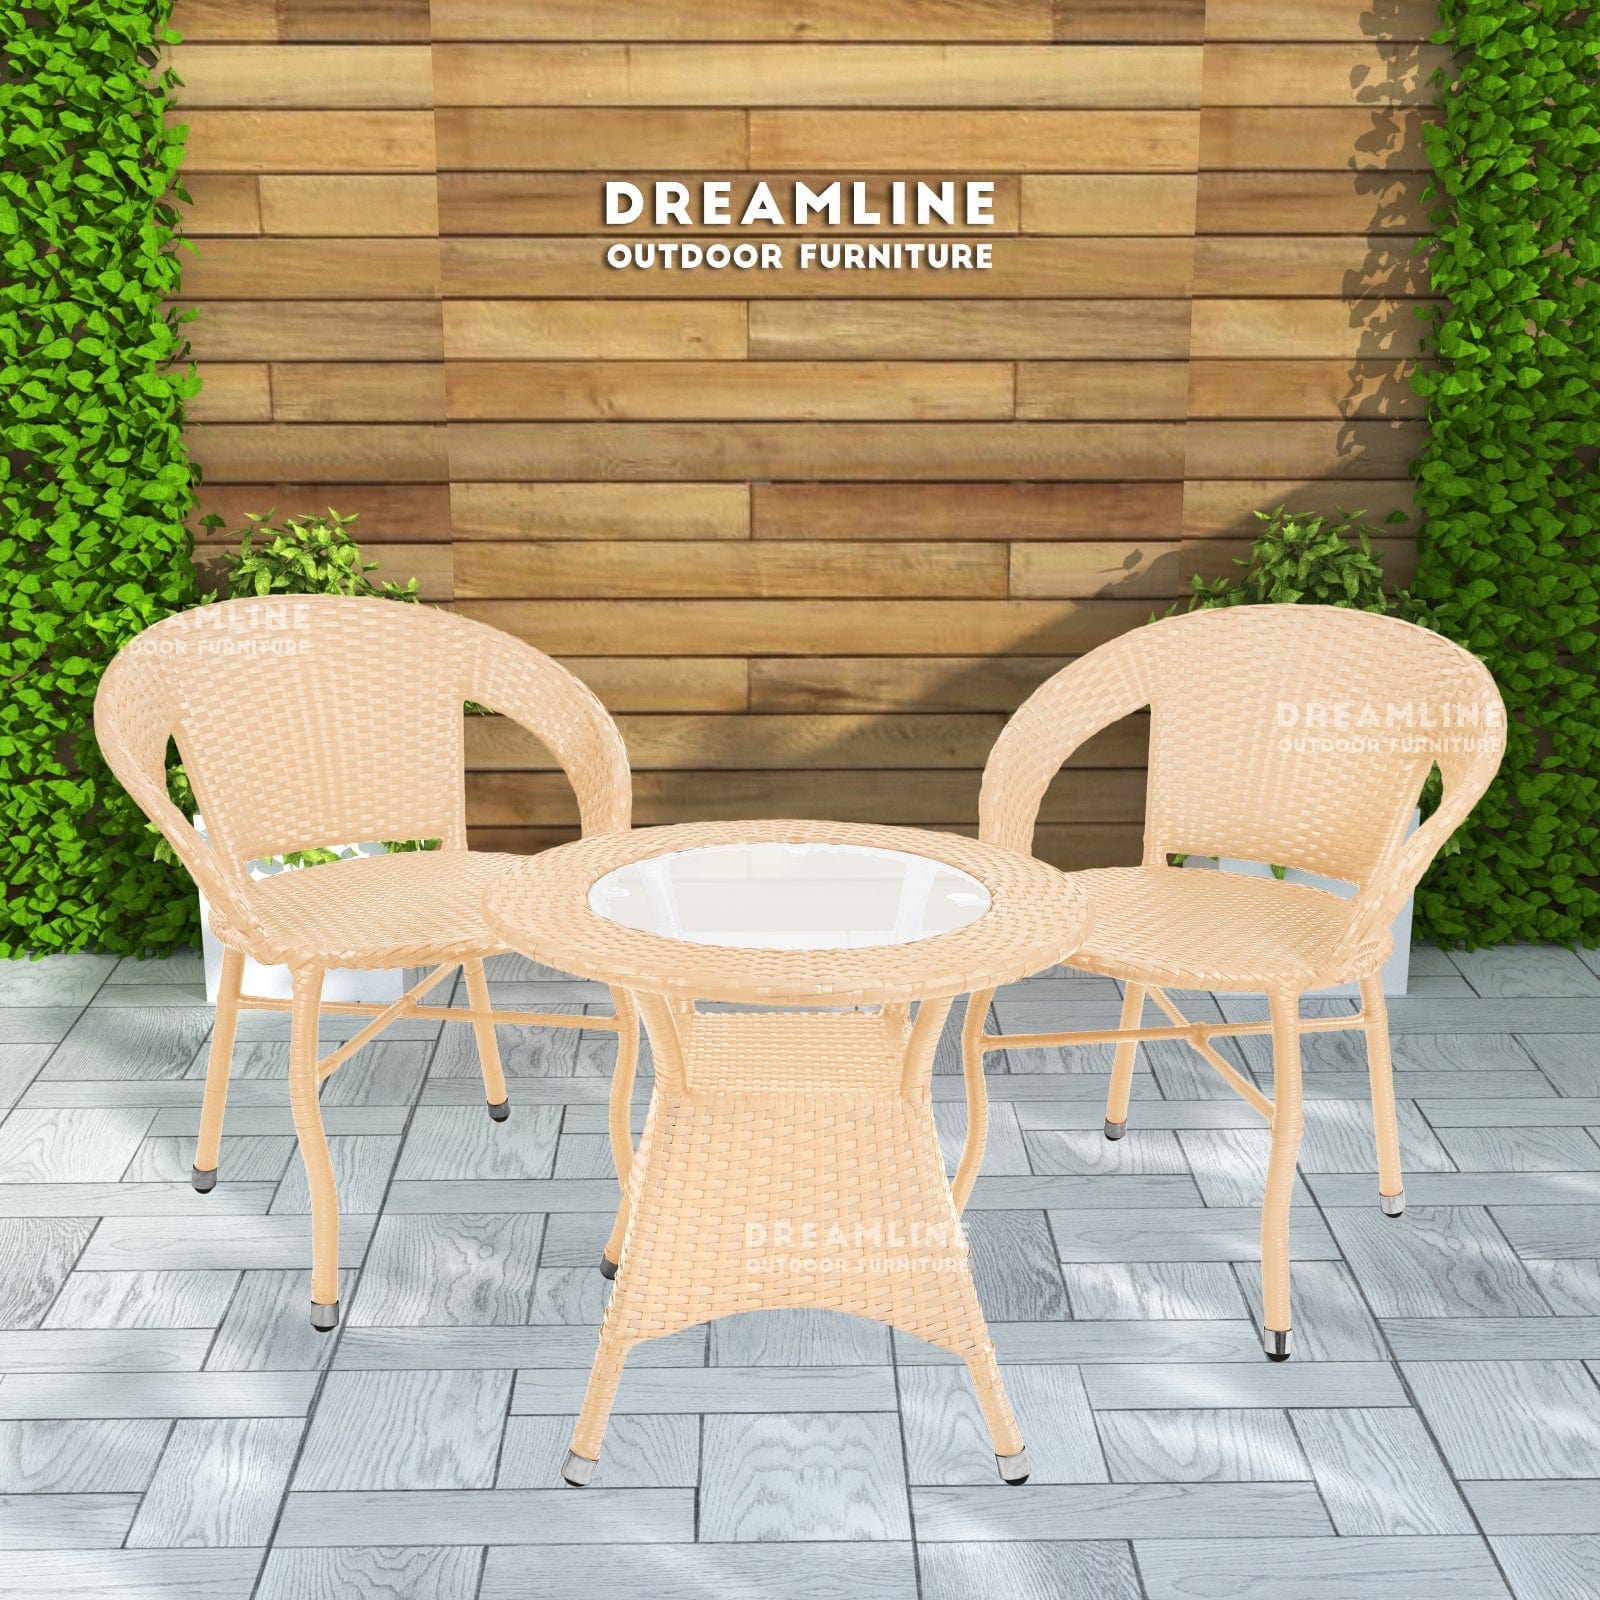 Dreamline Coffee Table Set - Chairs And Table Set (Cream)